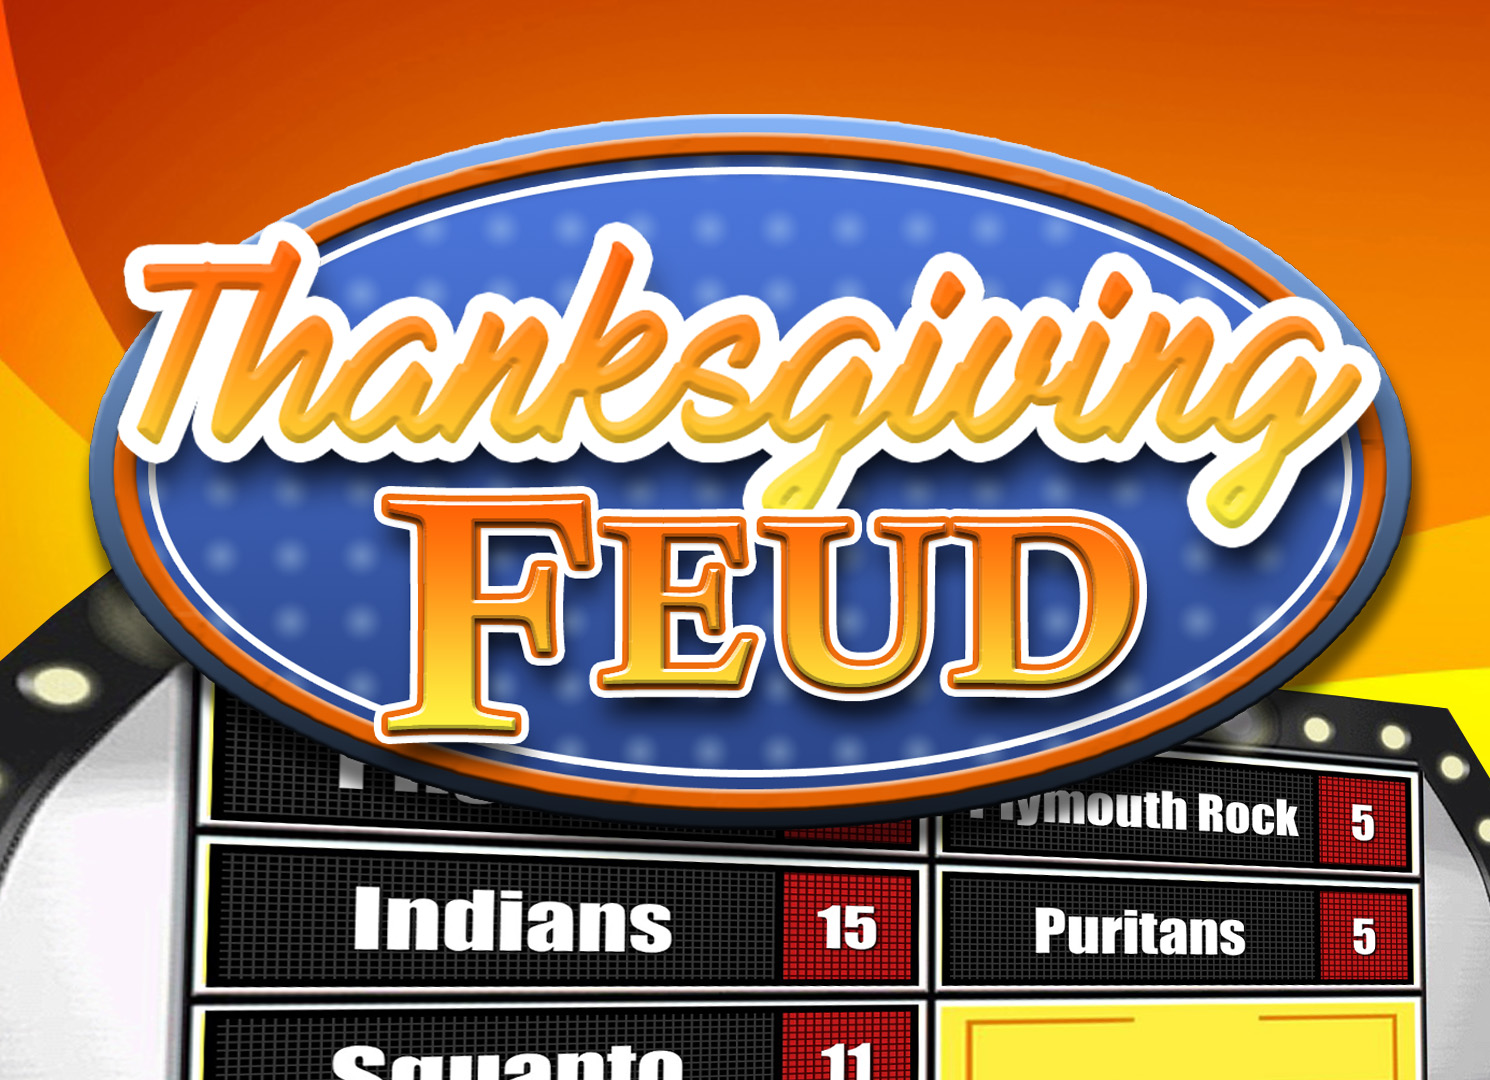 family feud for mac free download